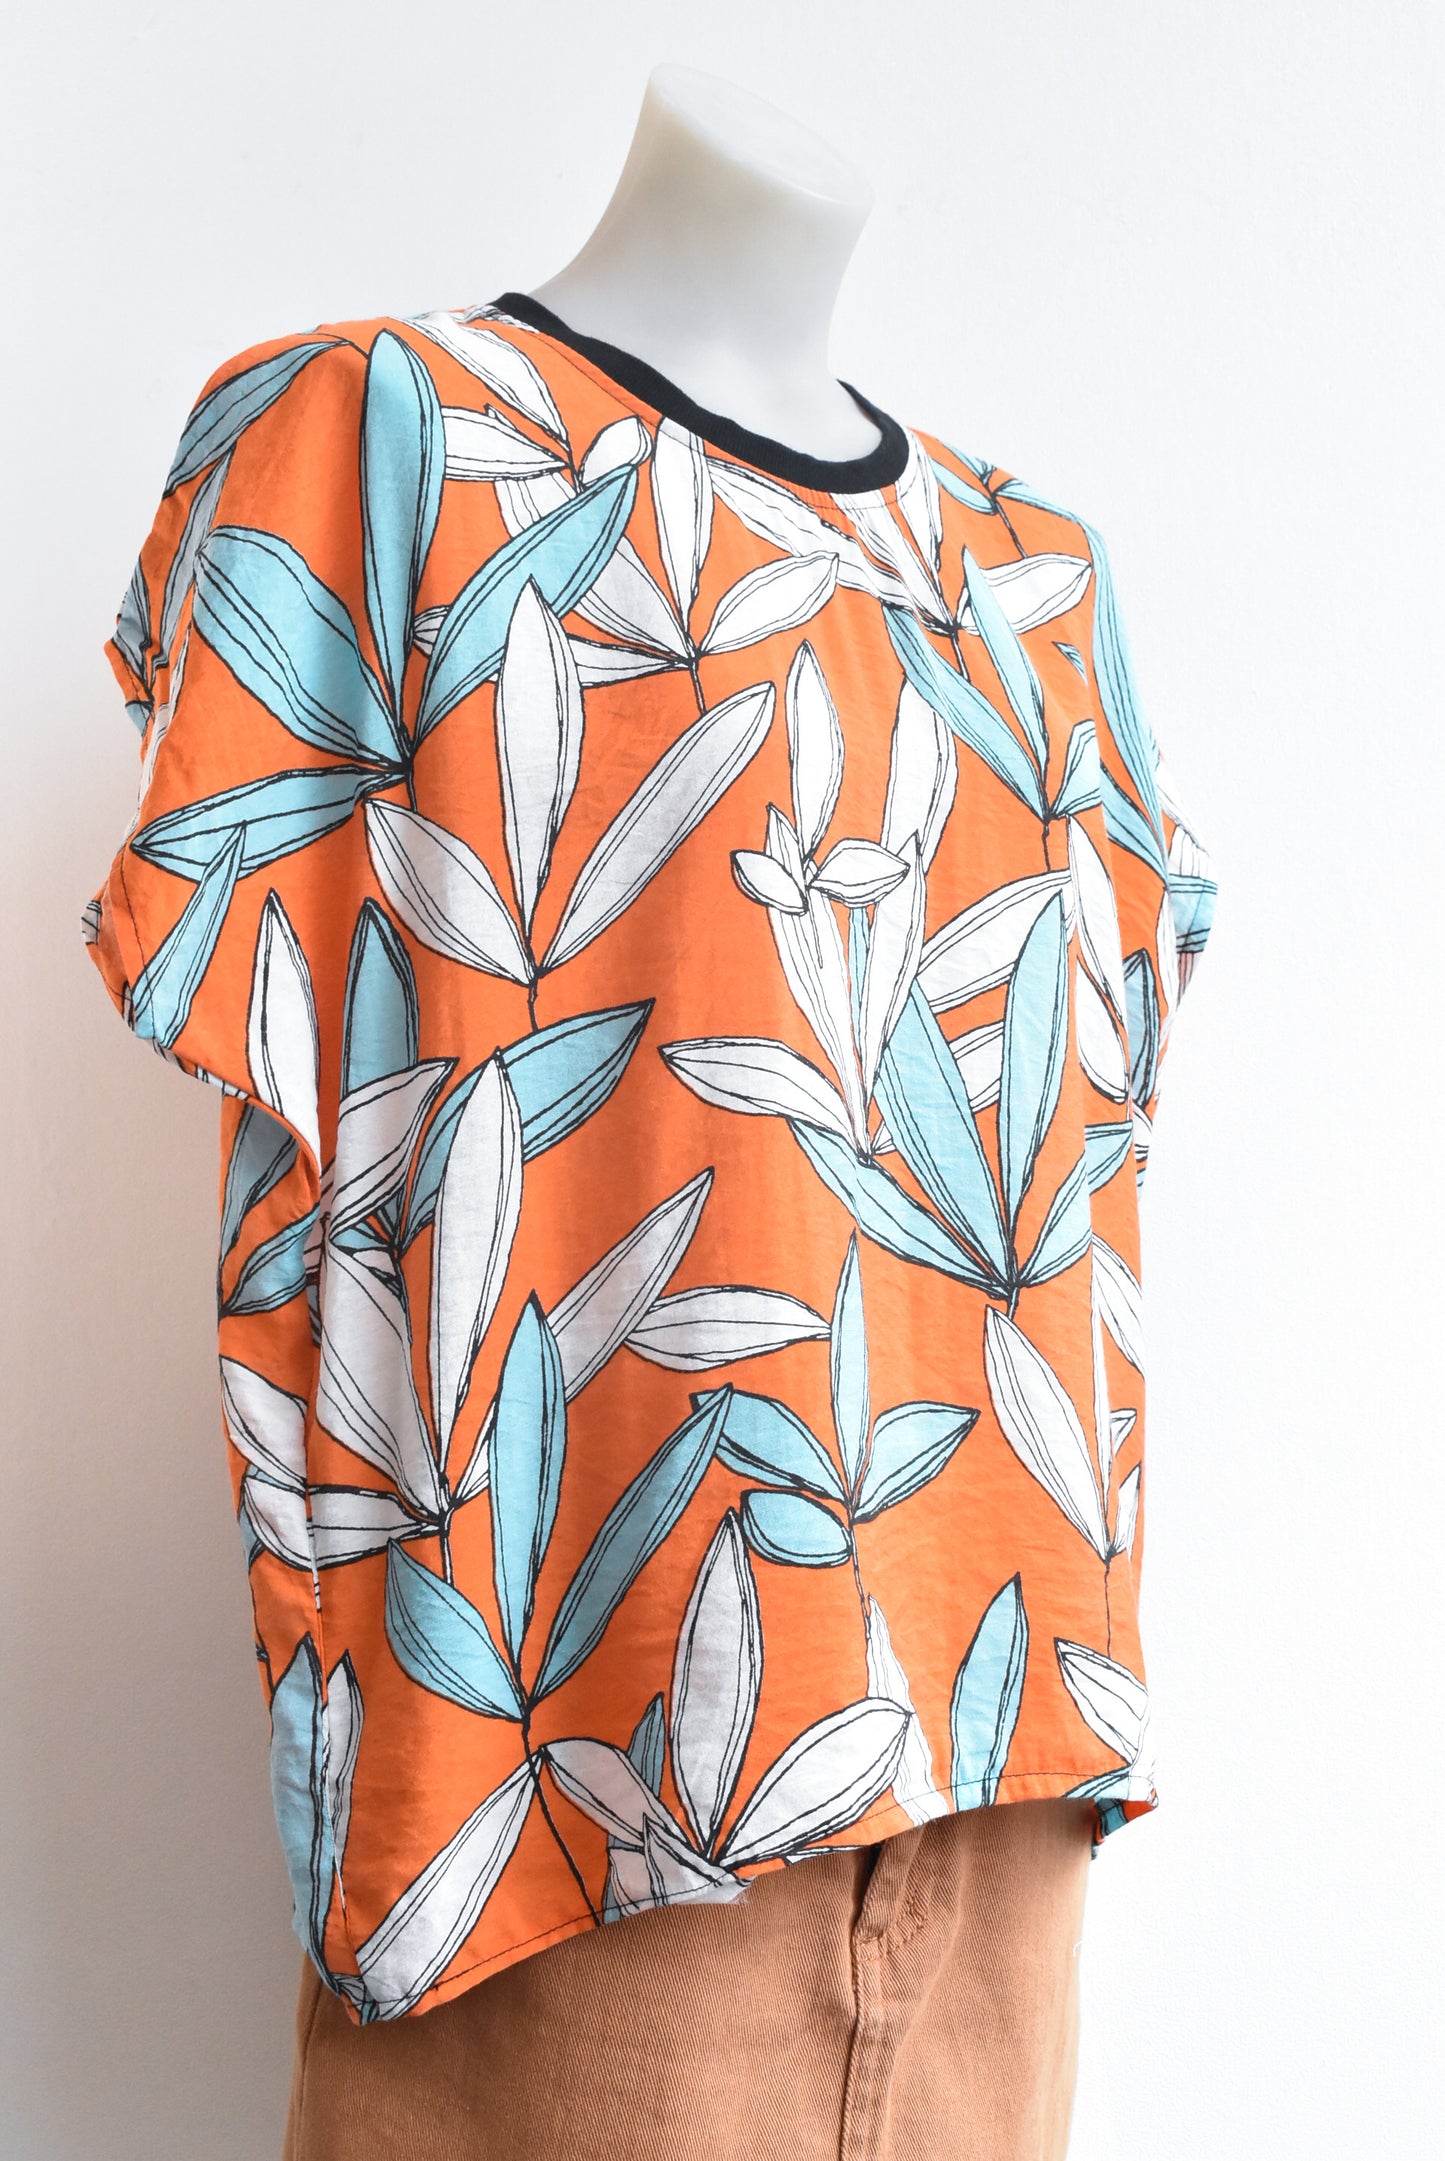 The Bloom Project leafy orange top, M/L